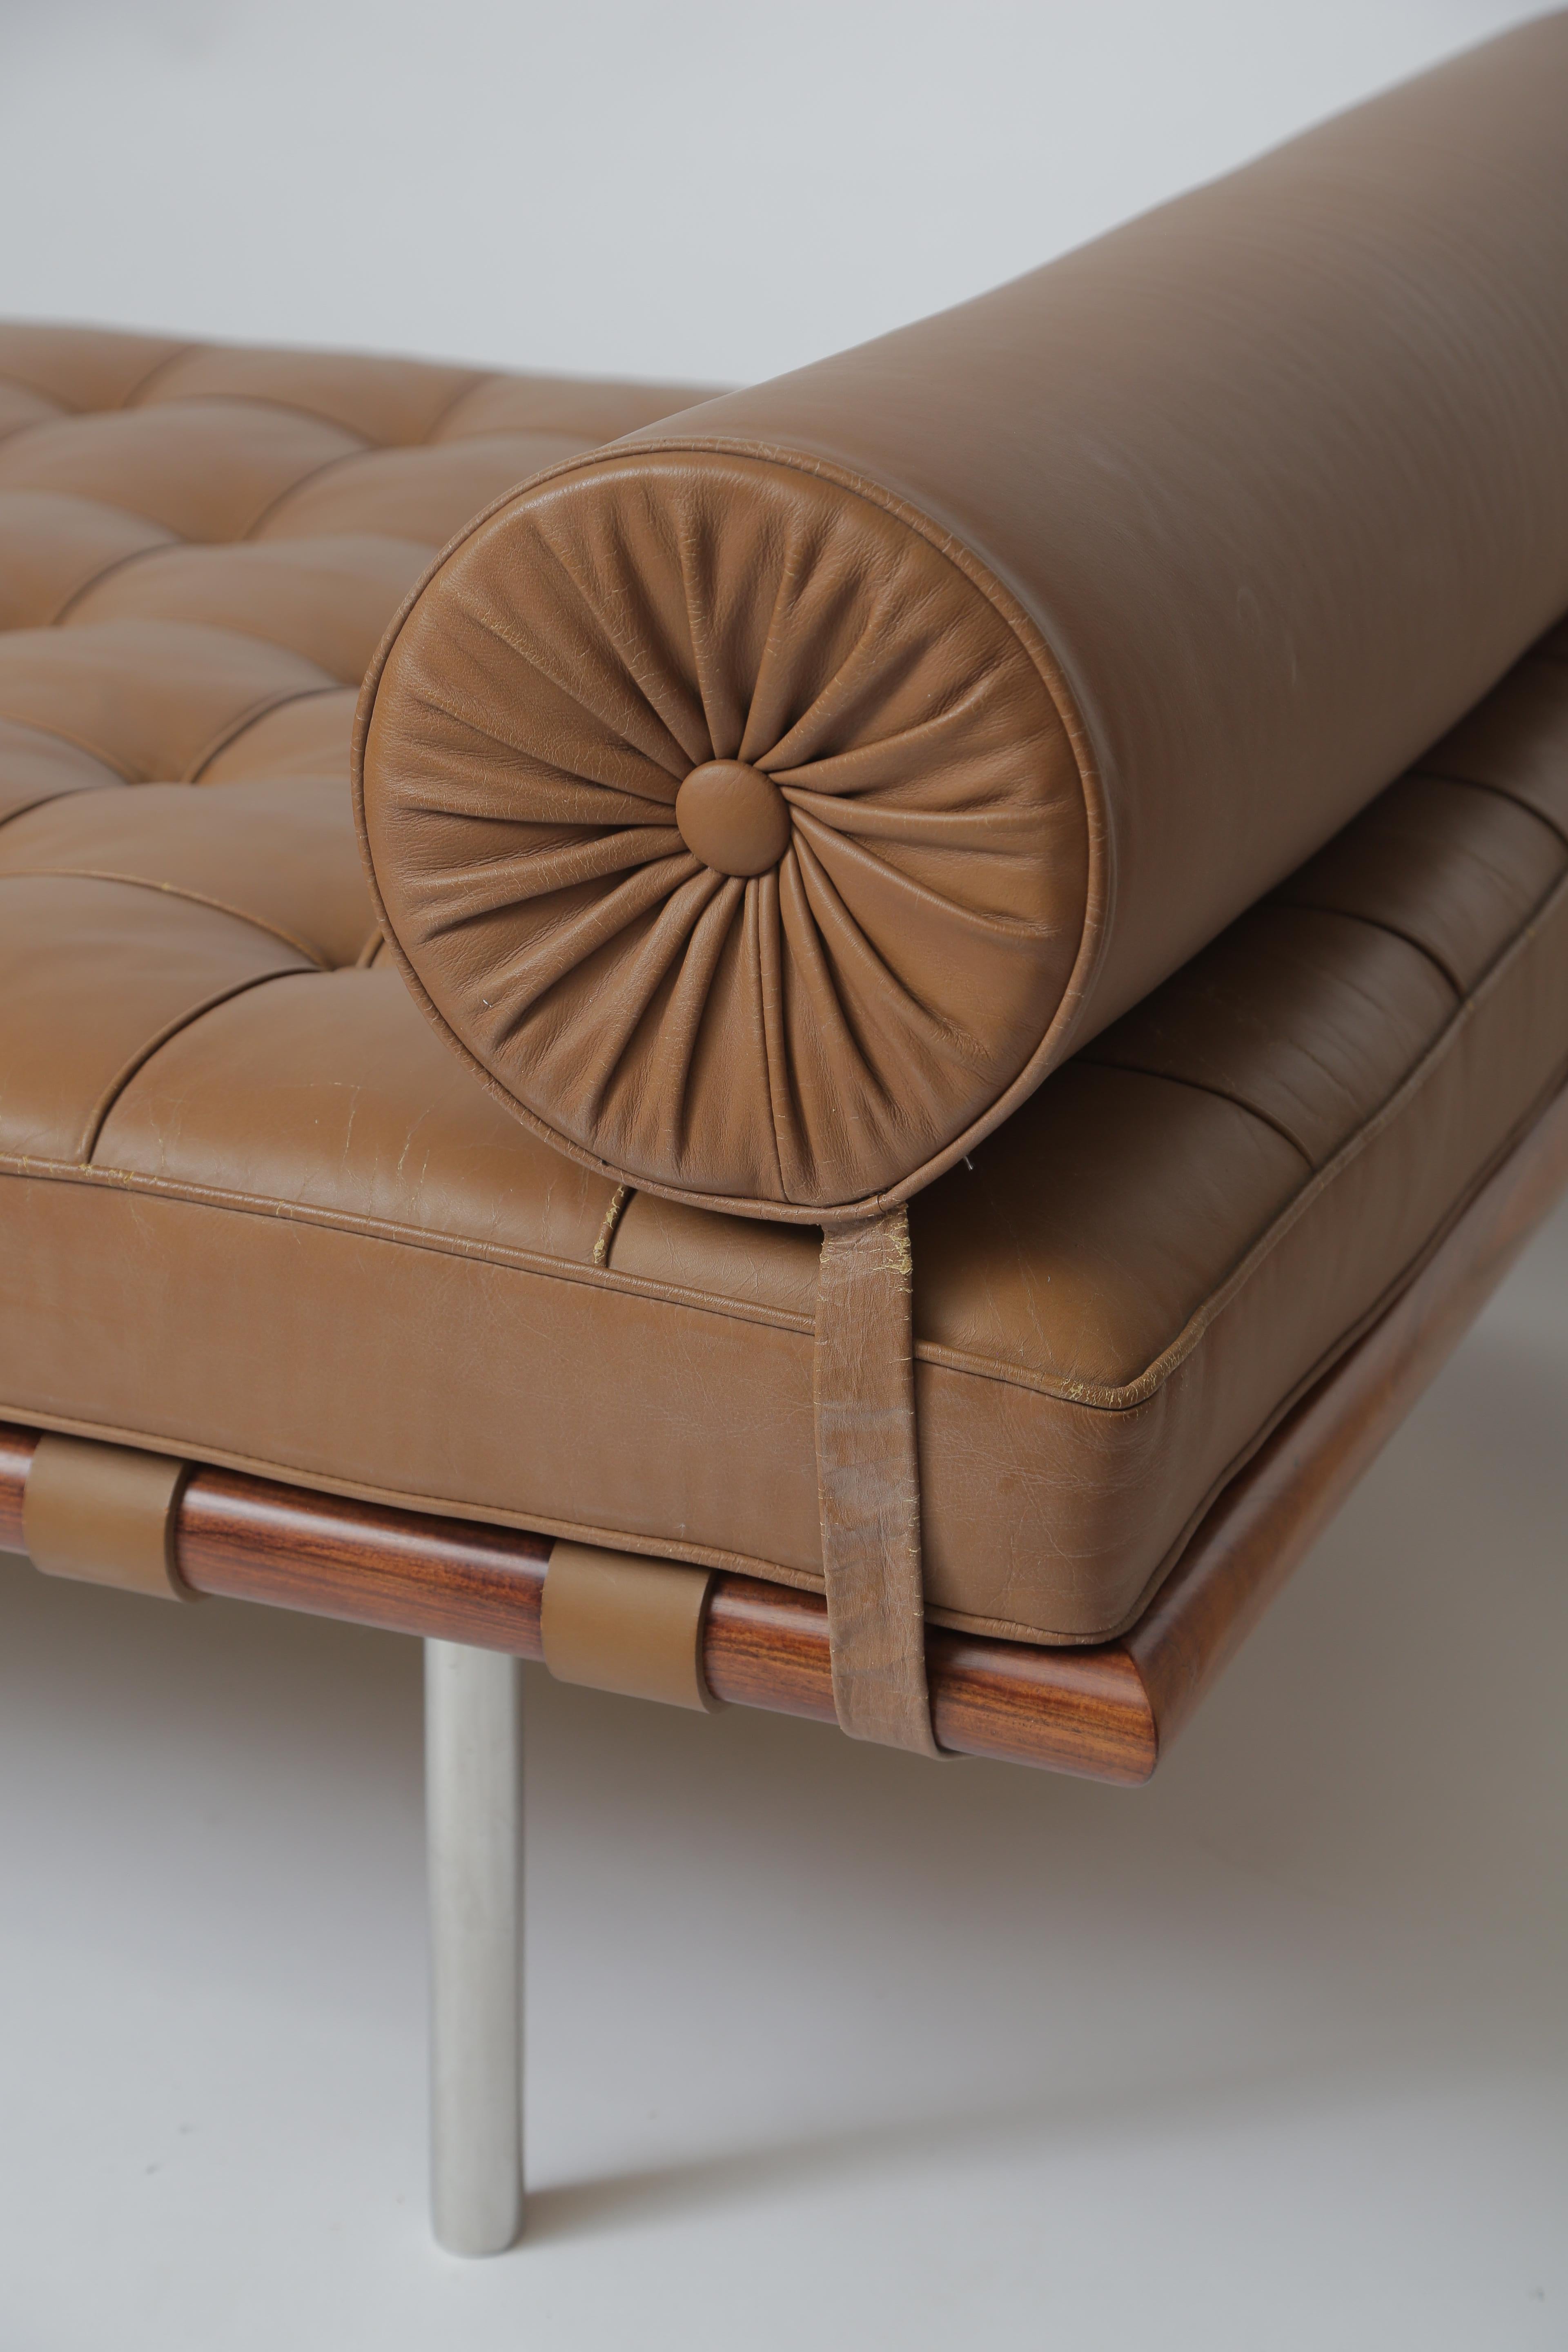 1970s daybed manufactured by Knoll
Original brown leather
Sewn label (extremely faded).